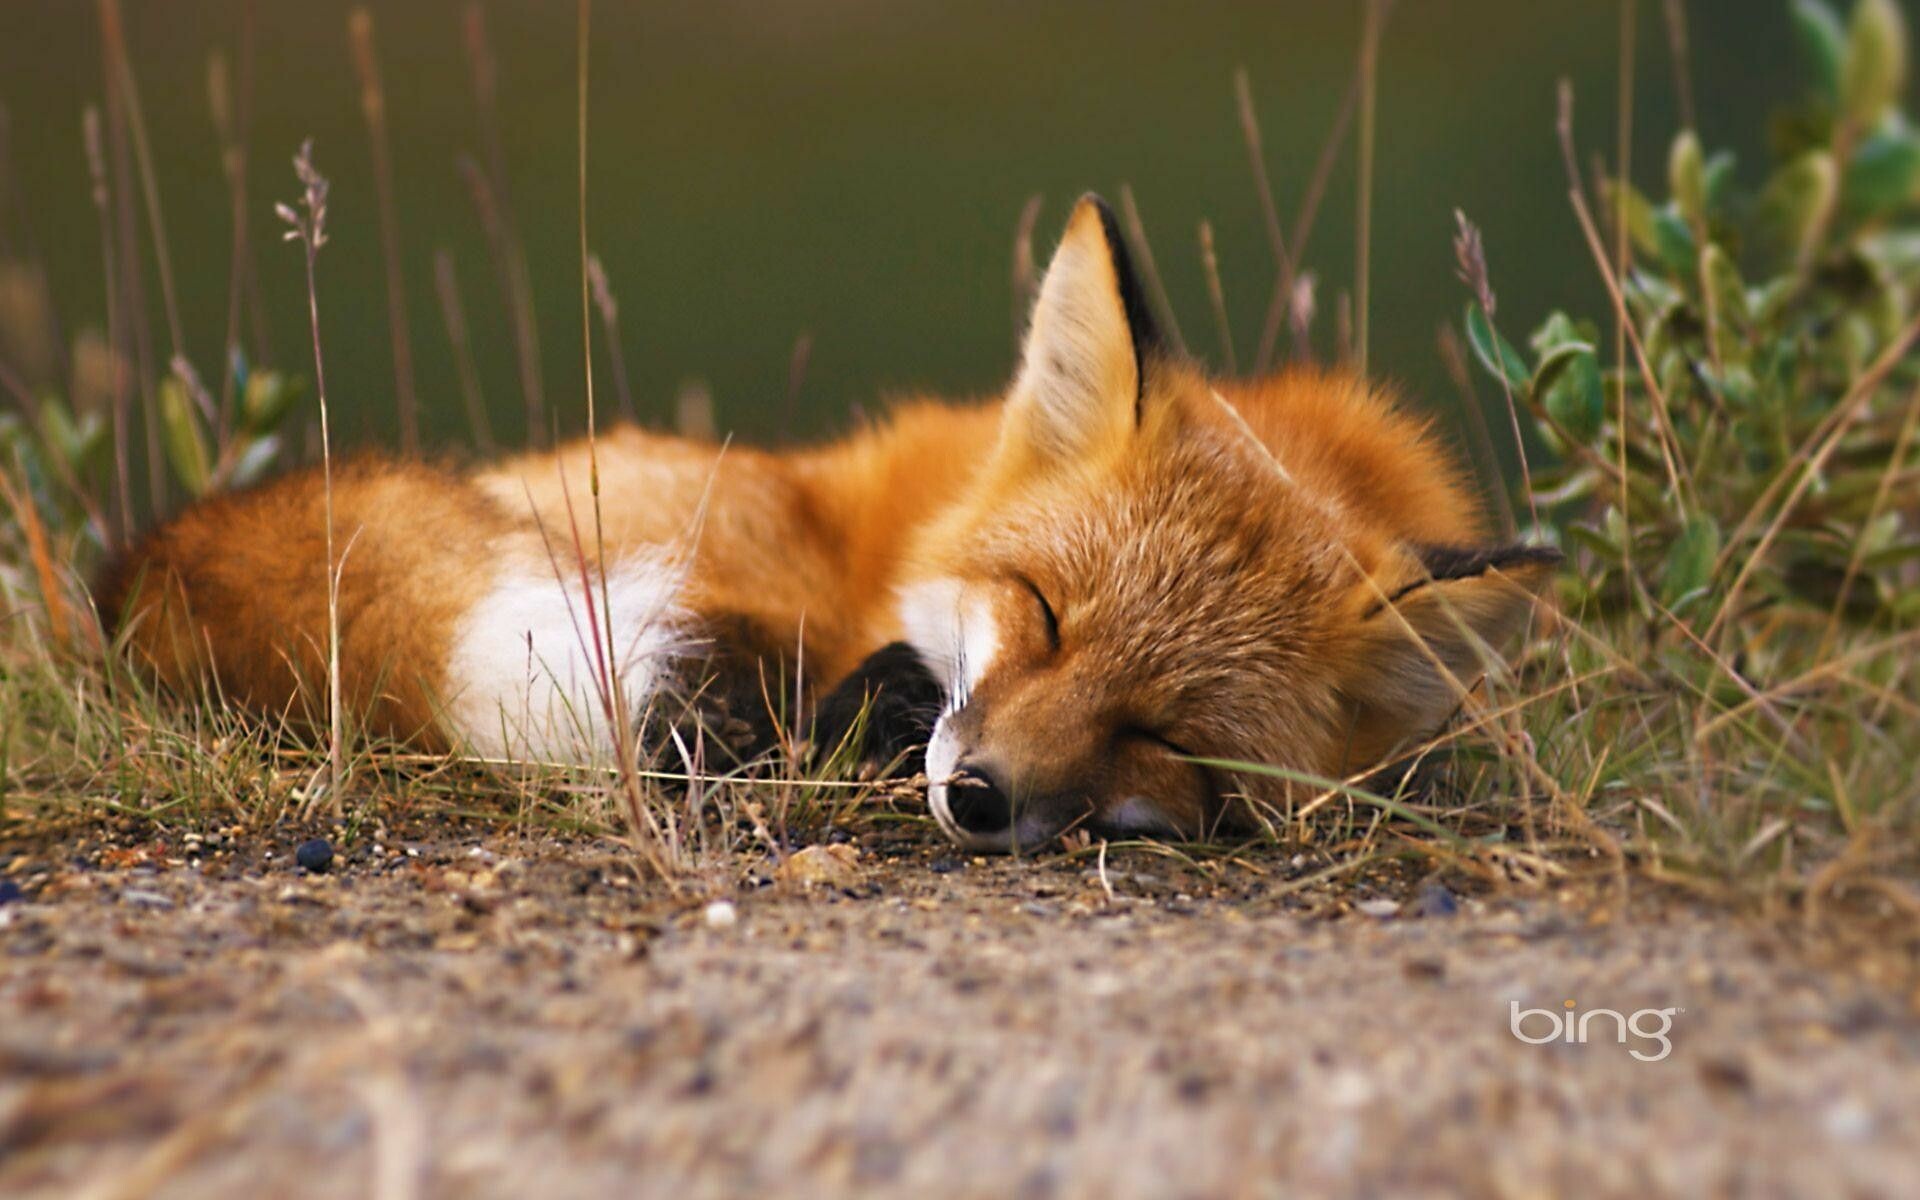 HD wallpaper, Desktop Hd Fox Background Image, Wholesome Cuteness, Irresistibly Charming, Adorable And Endearing, 1920X1200 Hd Desktop, Cute Red Fox